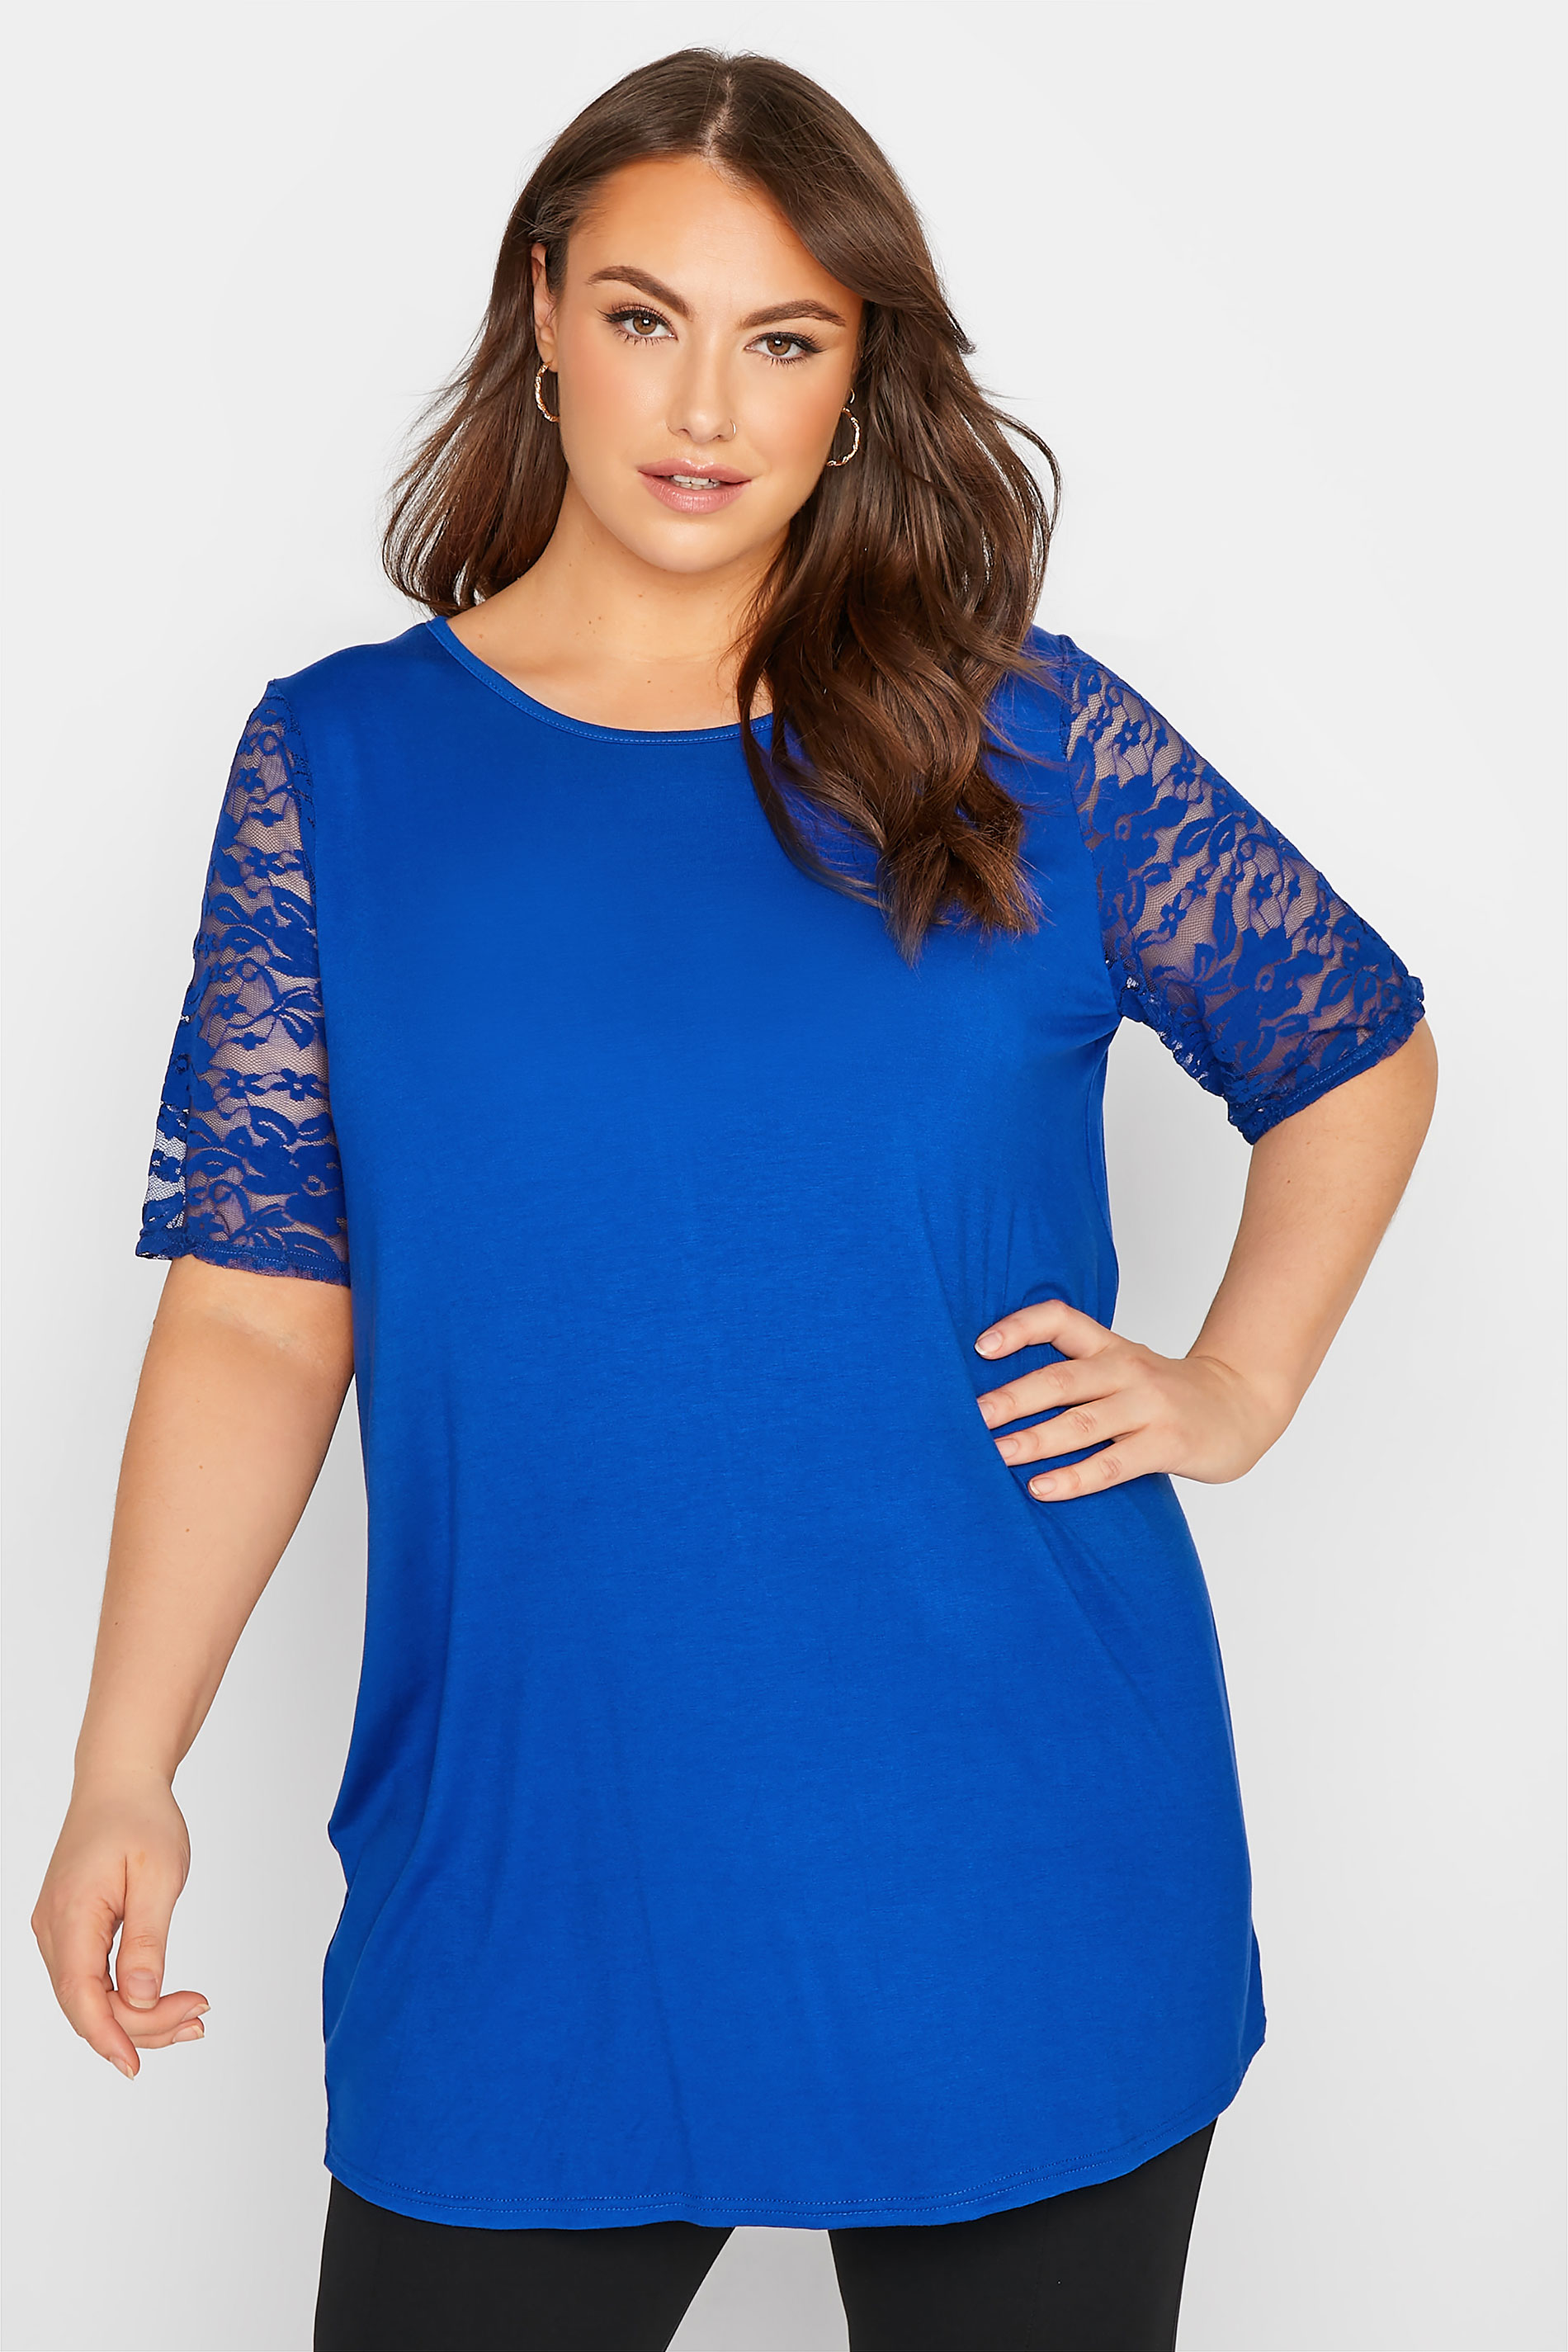 Grande taille  Tops Grande taille  Tops dentelle | LIMITED COLLECTION - Top Bleu Roi Manches Courtes Dentelle - AM75908